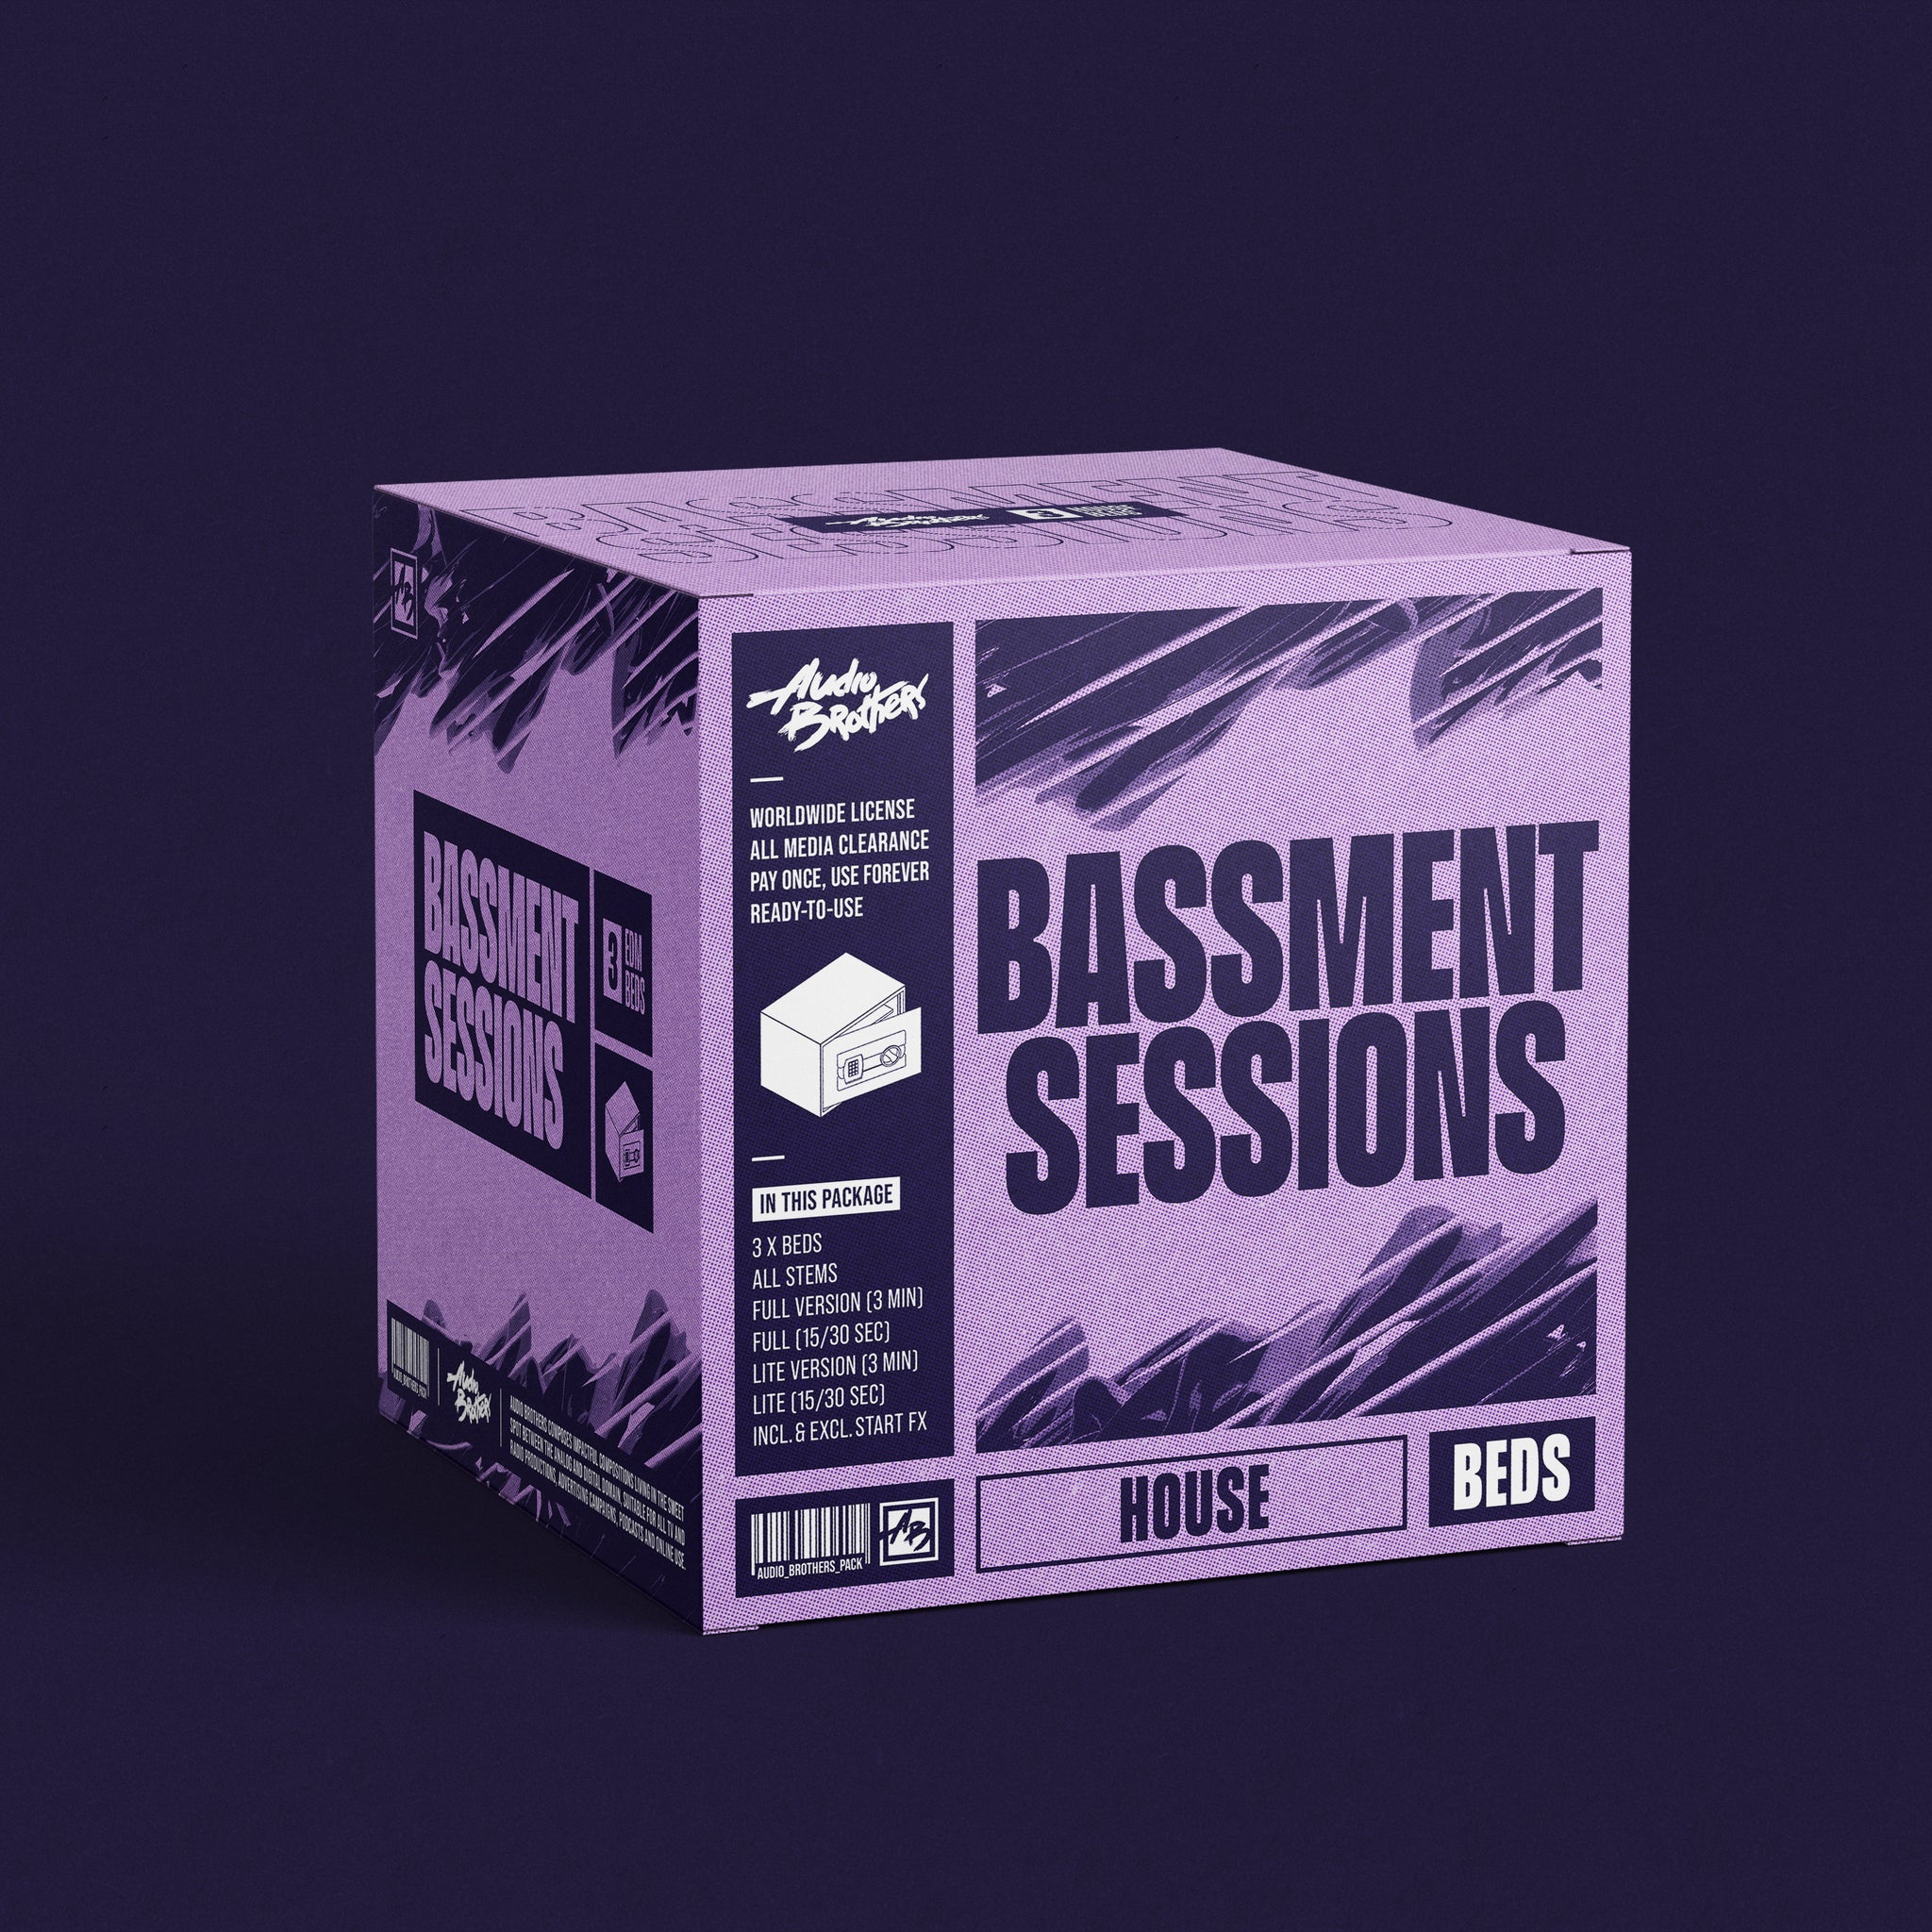 3x Music Beds (House) - Bassment Sessions